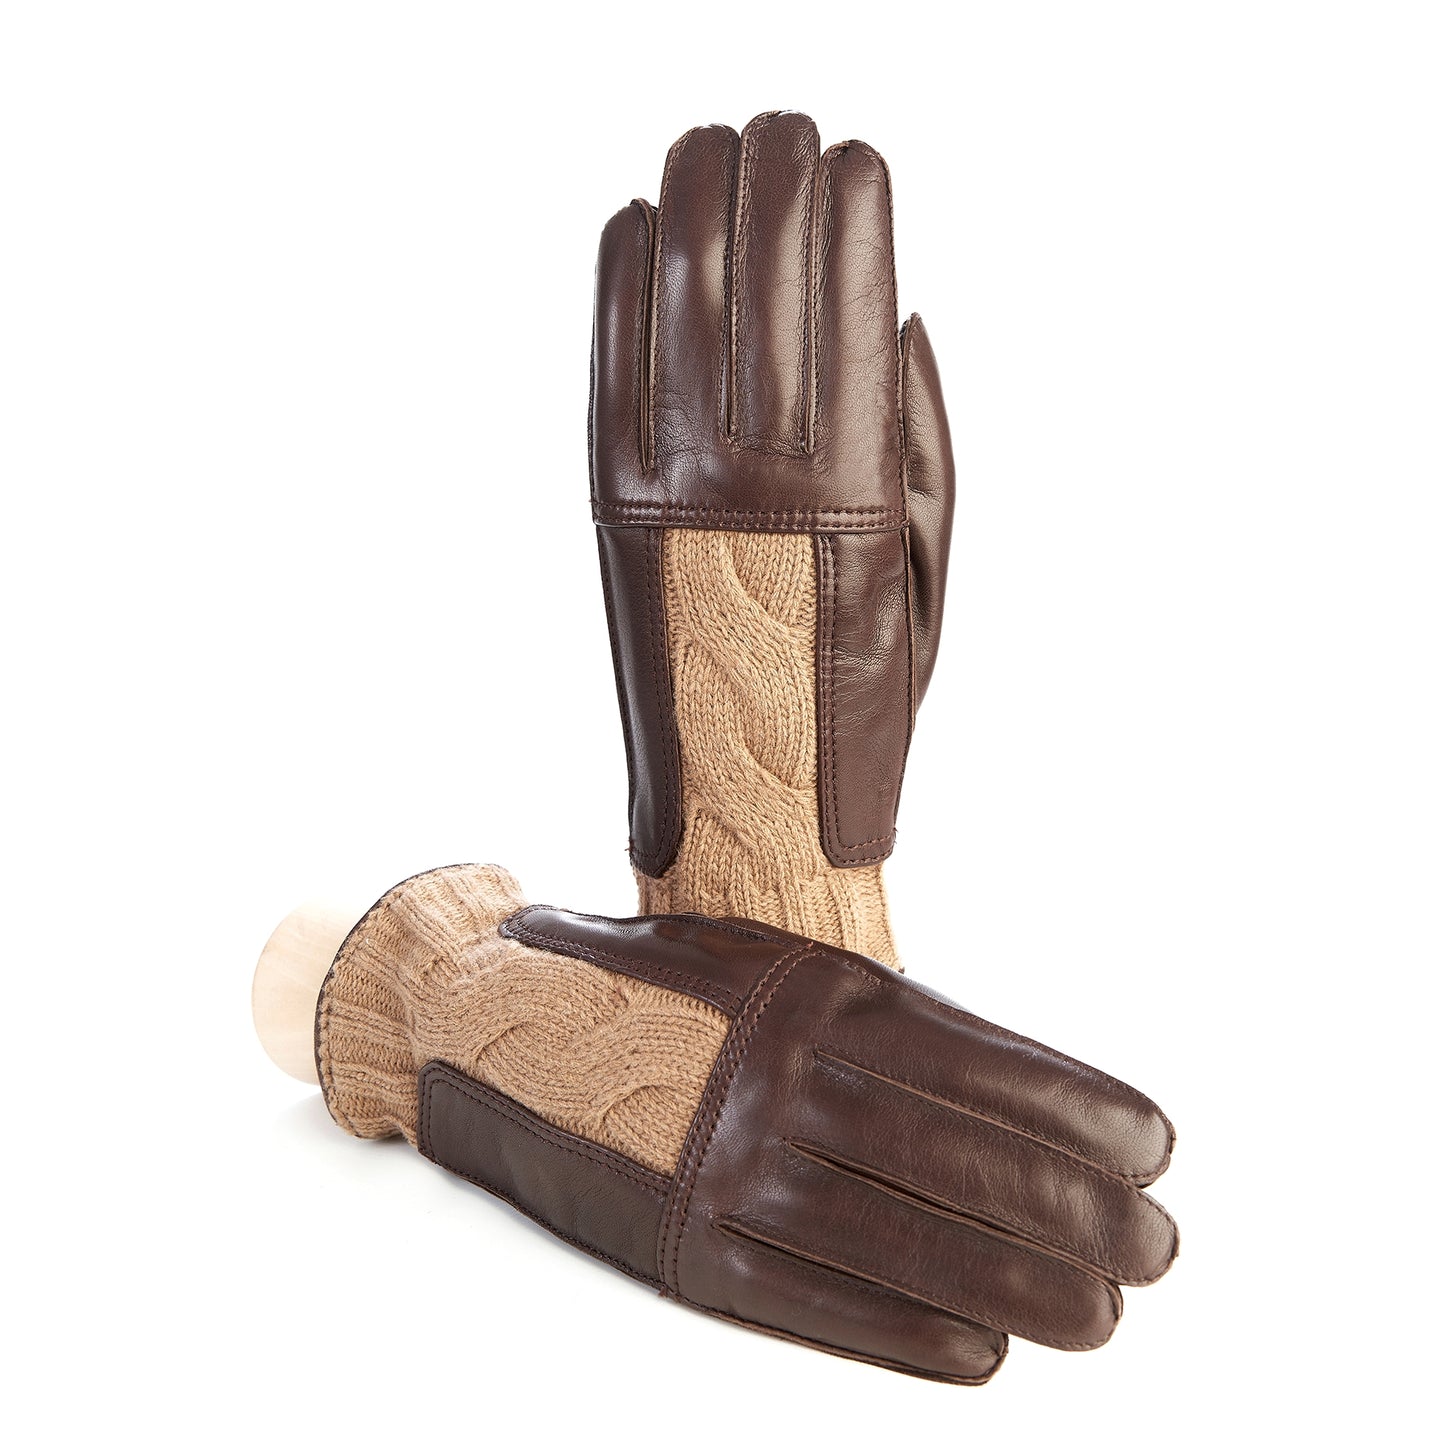 Men's leather gloves in color brown with beige woven wool insert on top